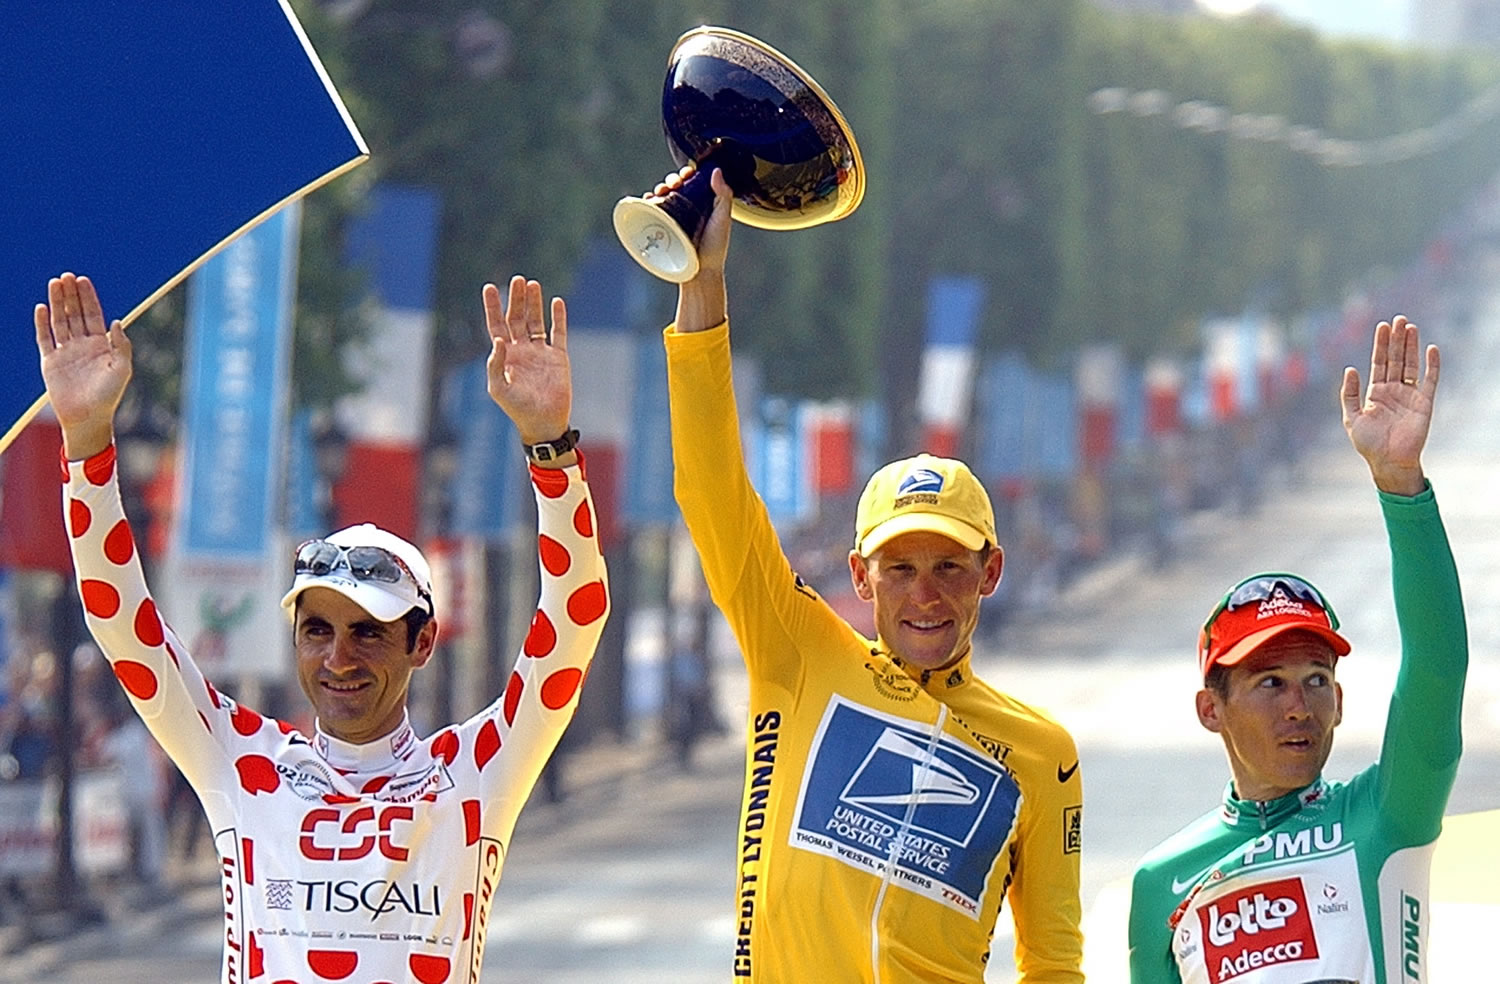 Lance Armstrong, center, waving from the podium as he holds the winner's trophy July 28, 2002, along with best sprinter Robbie McEwen, of Australia, right, and best climber Laurent Jalabert, of France, after the 20th and final stage of the Tour de France cycling race between Melun and Paris.